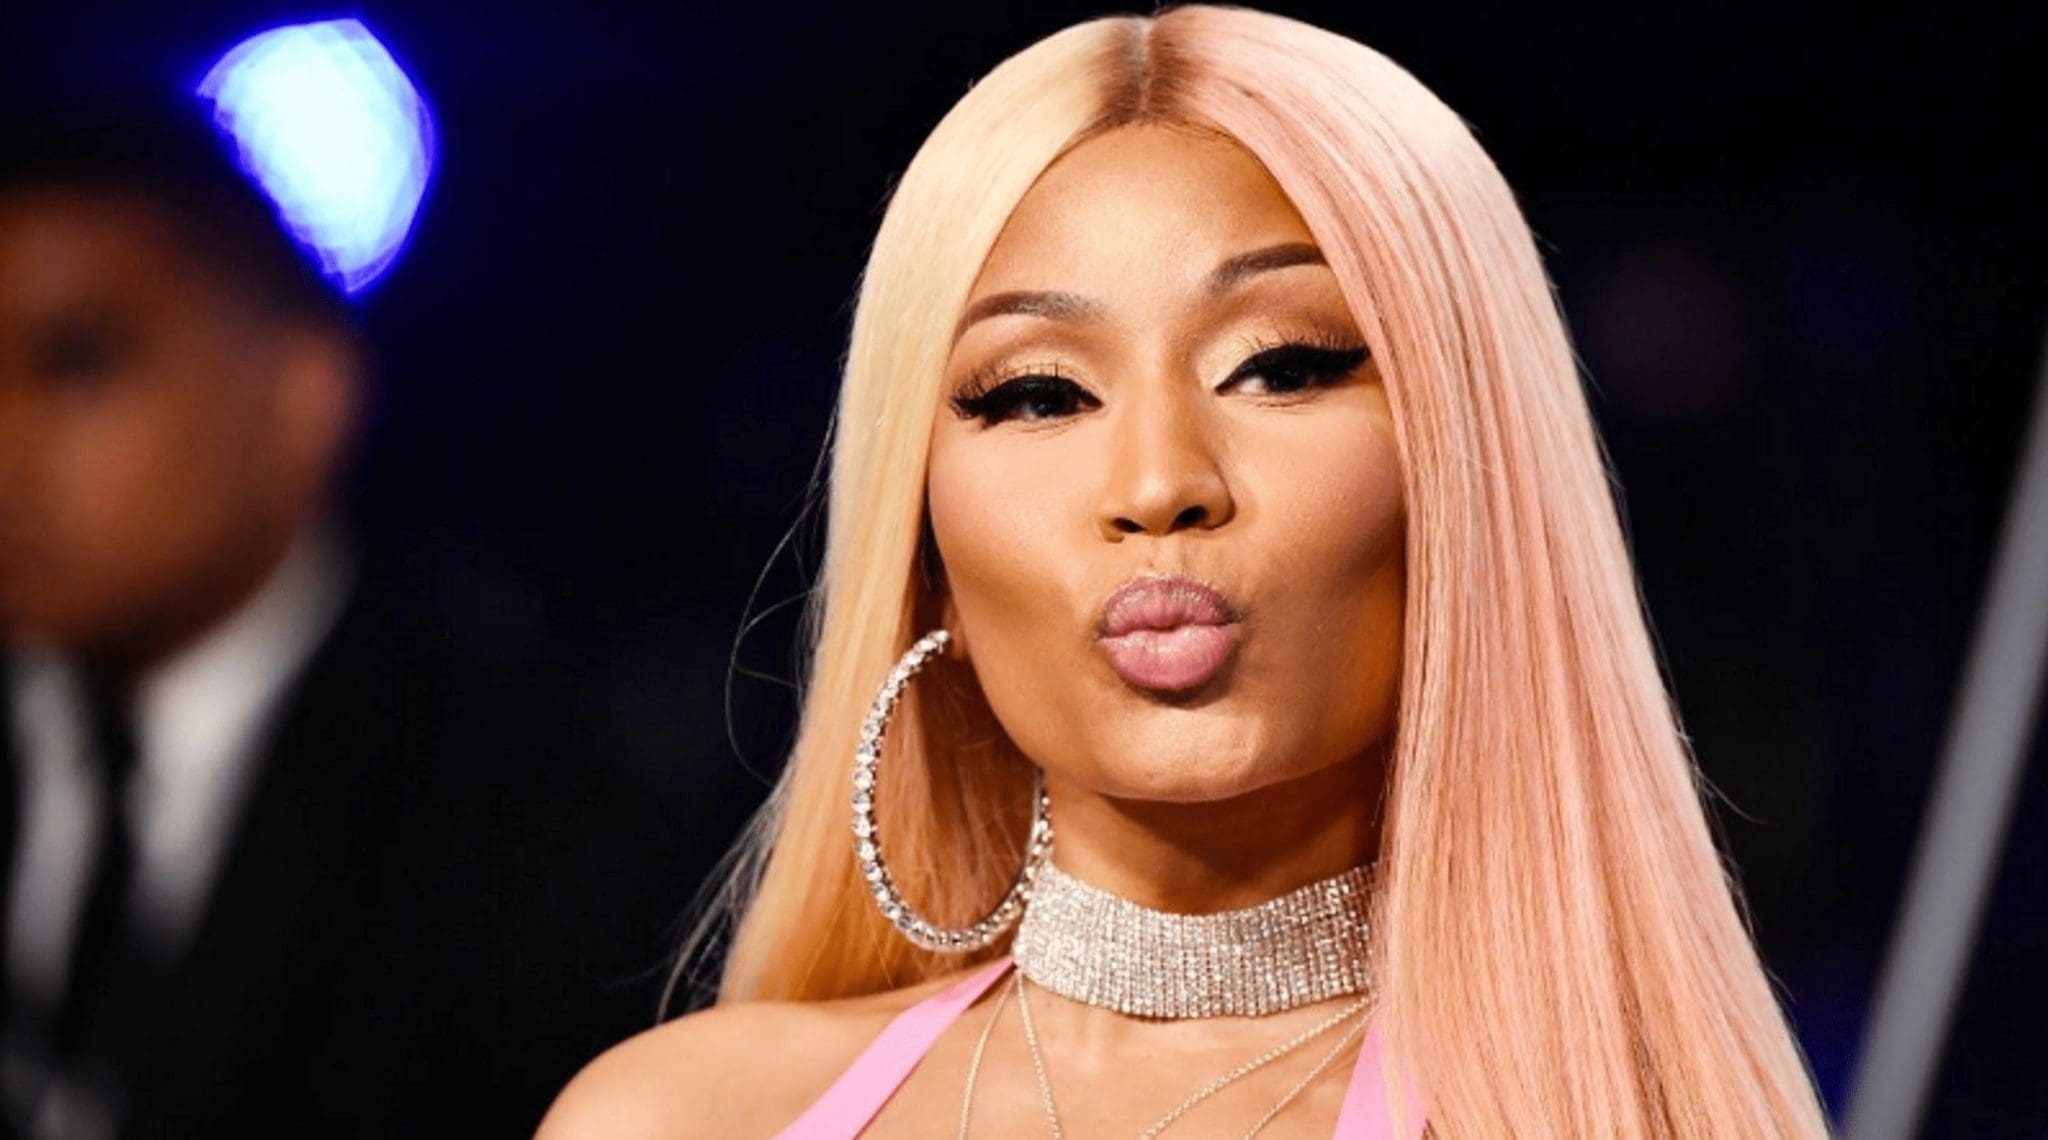 The First Trailer For Nicki Minaj's Six-Episode Docuseries Has Been Released